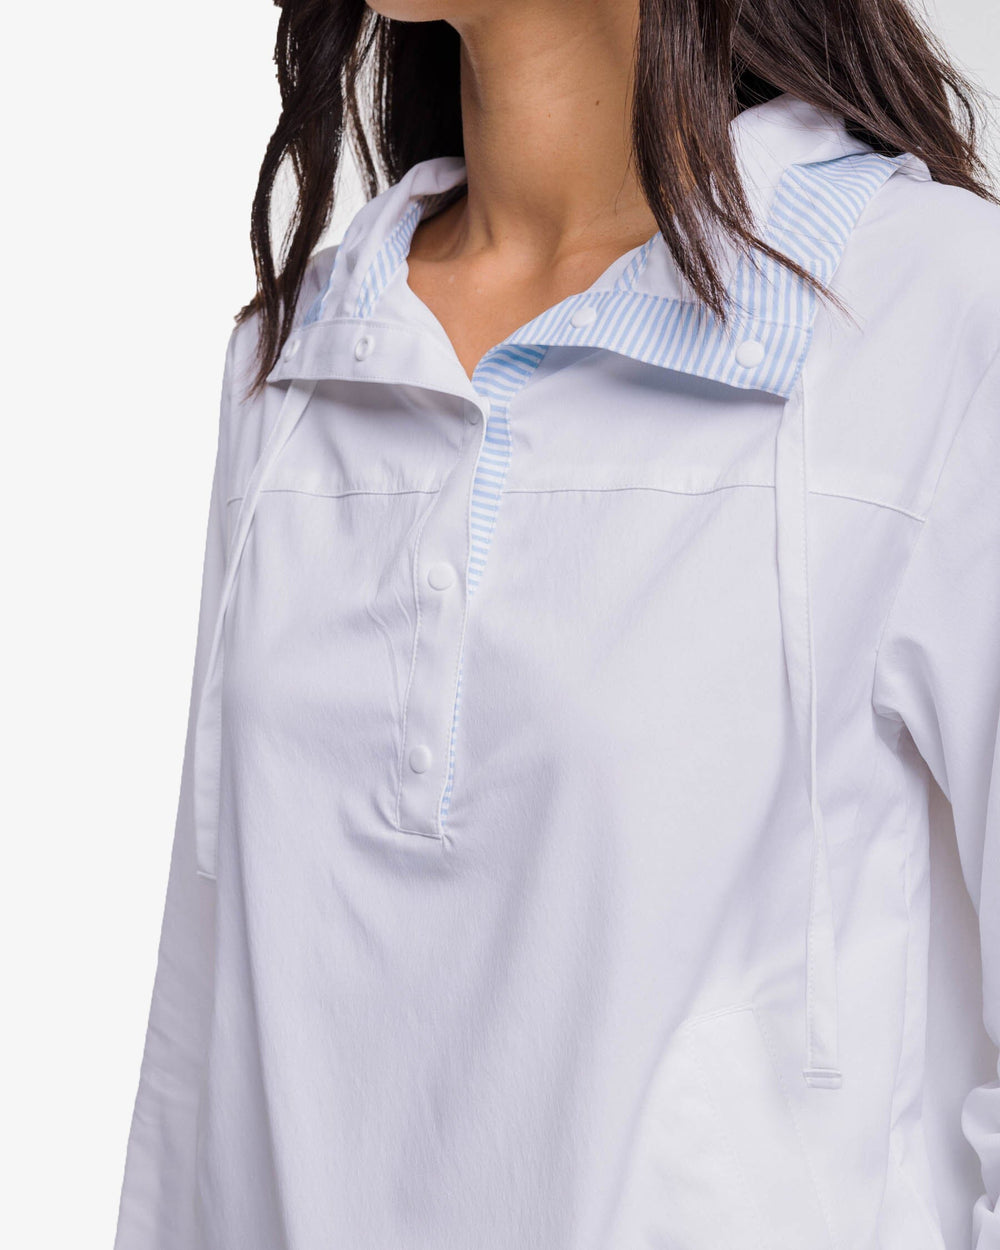 The detail view of the Southern Tide Calie Pop Placket Popover by Southern Tide - Classic White